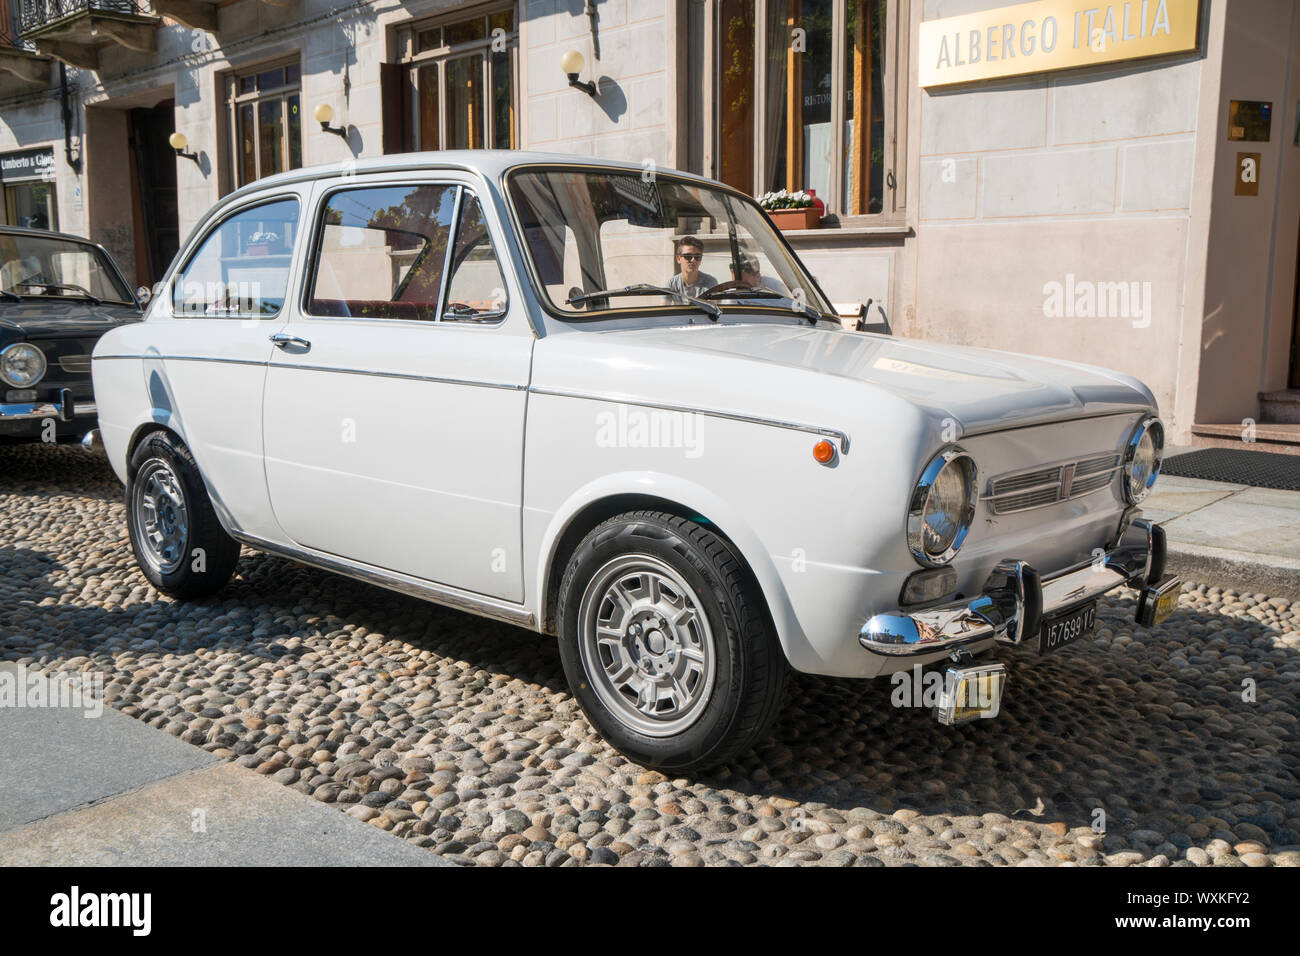 Varallo Sesia, Italy - June 02, 2019: Classic car, Italian old Fiat 850 during a vintage cars rally Stock Photo